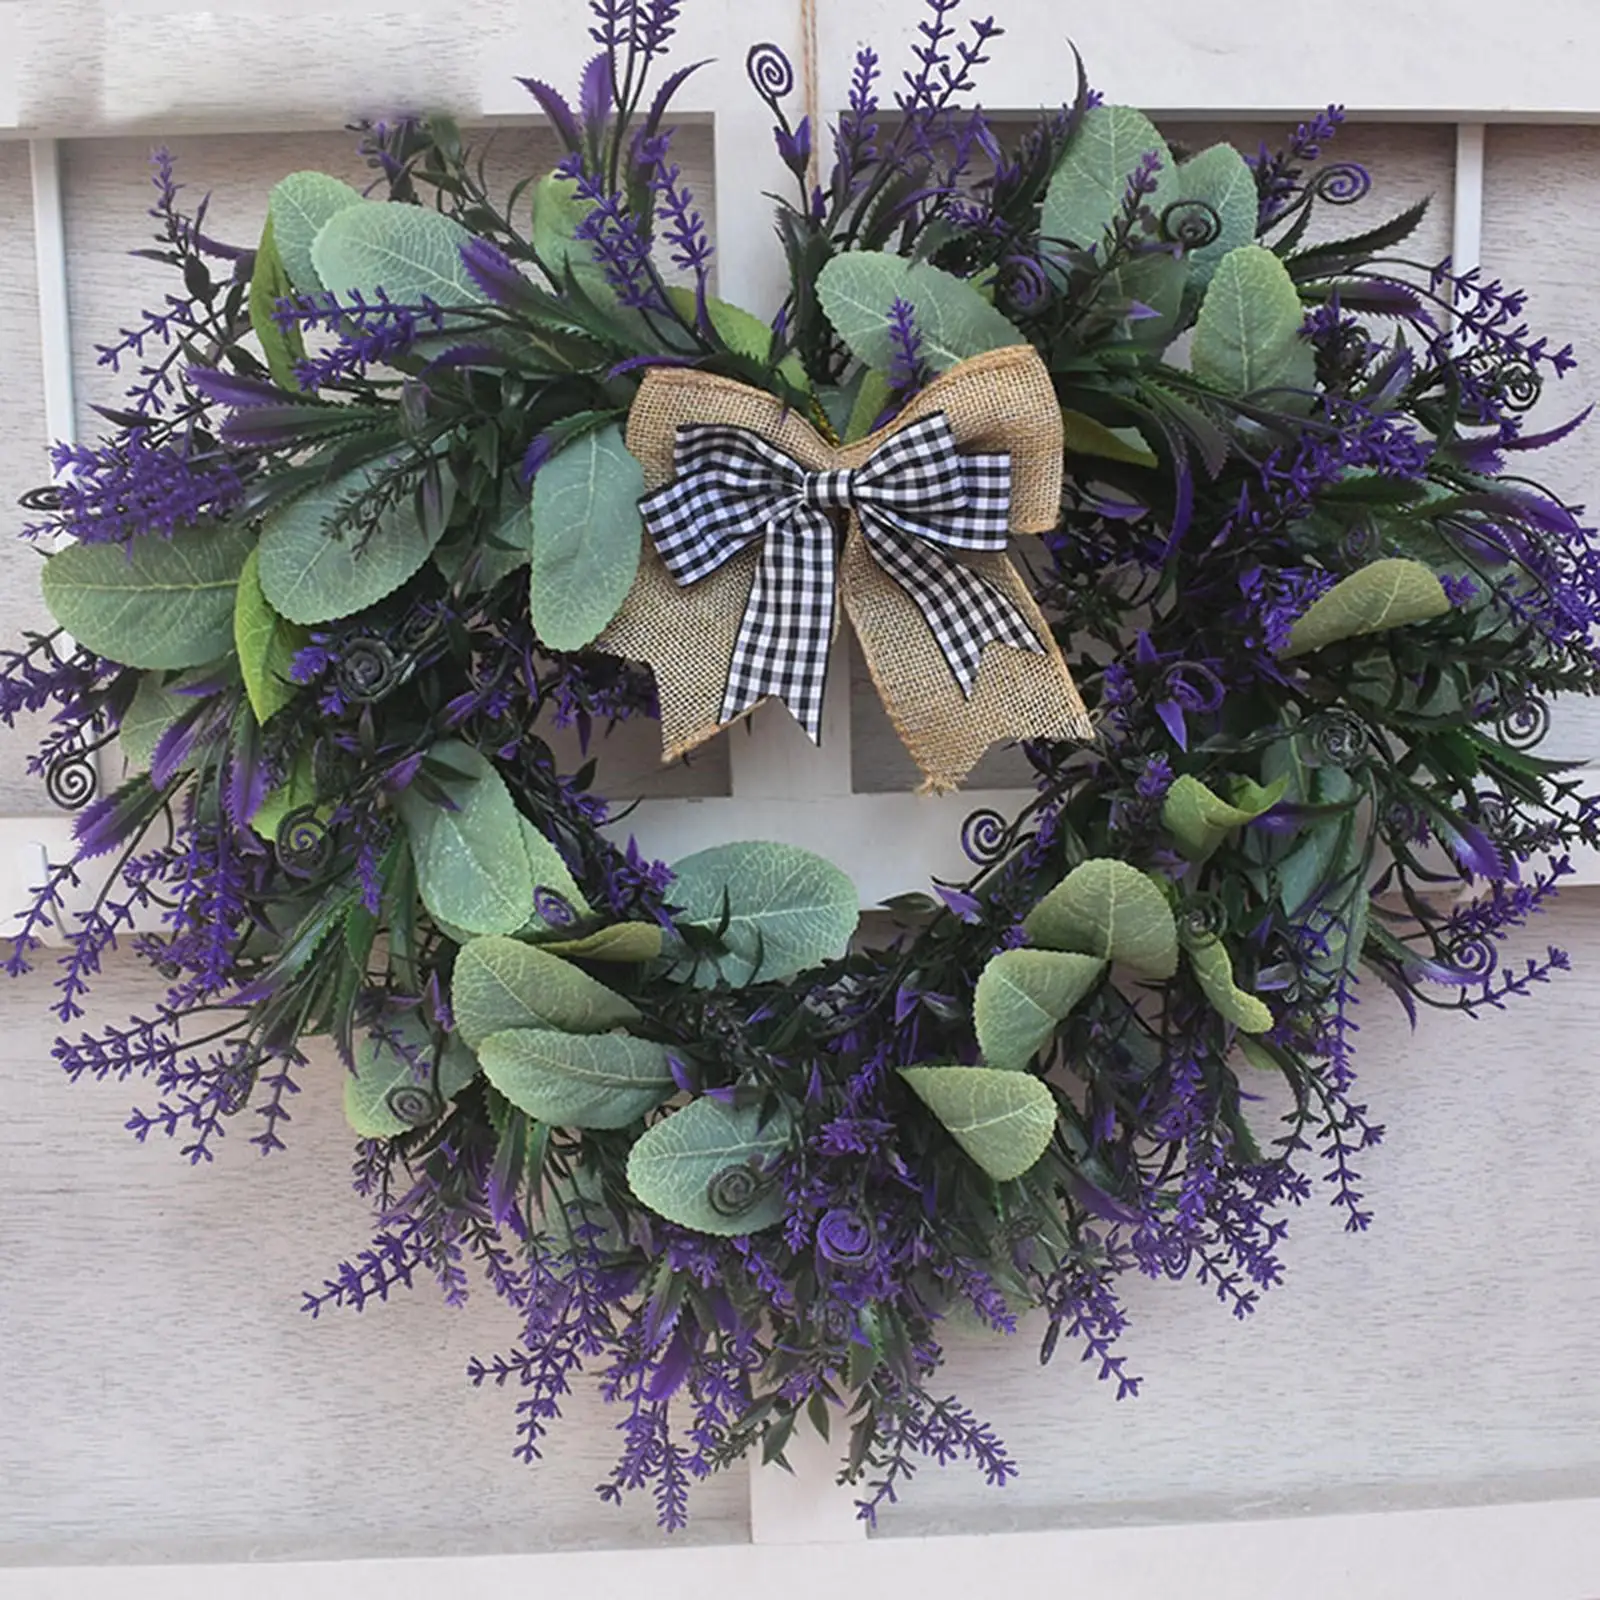 Artificial Lavender Wreath Garland,Flowers Garland Hanging Pendant for Front Door, Wall, Home, Decoration